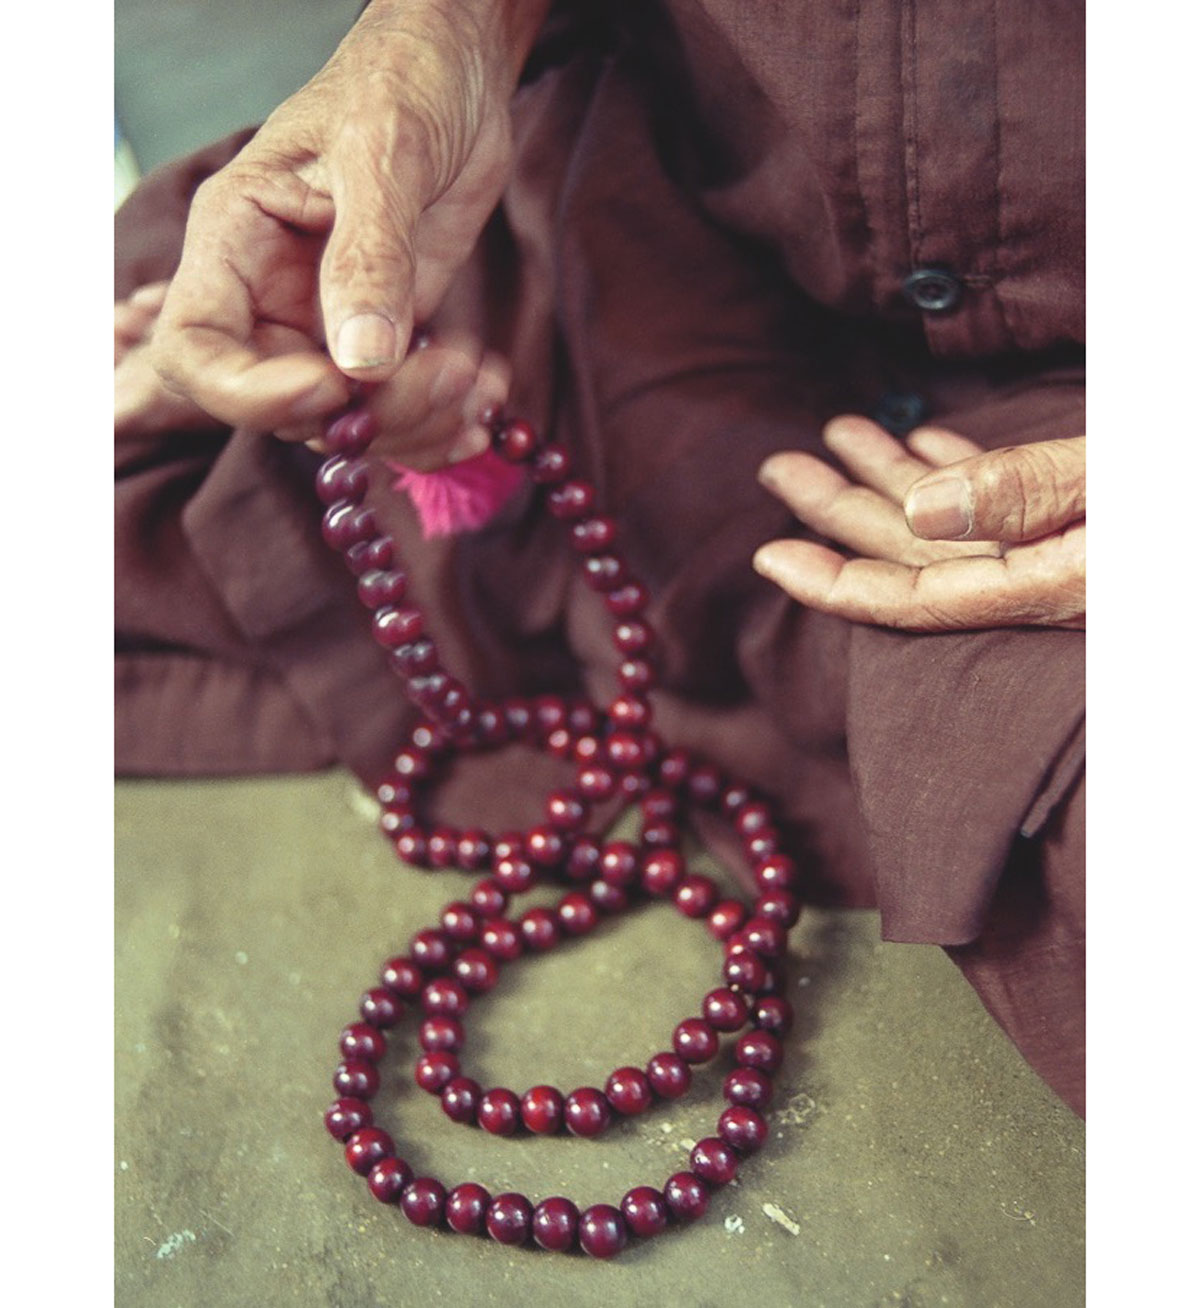 https://tricycle.org/wp-content/uploads/2006/12/worry-beads.jpg